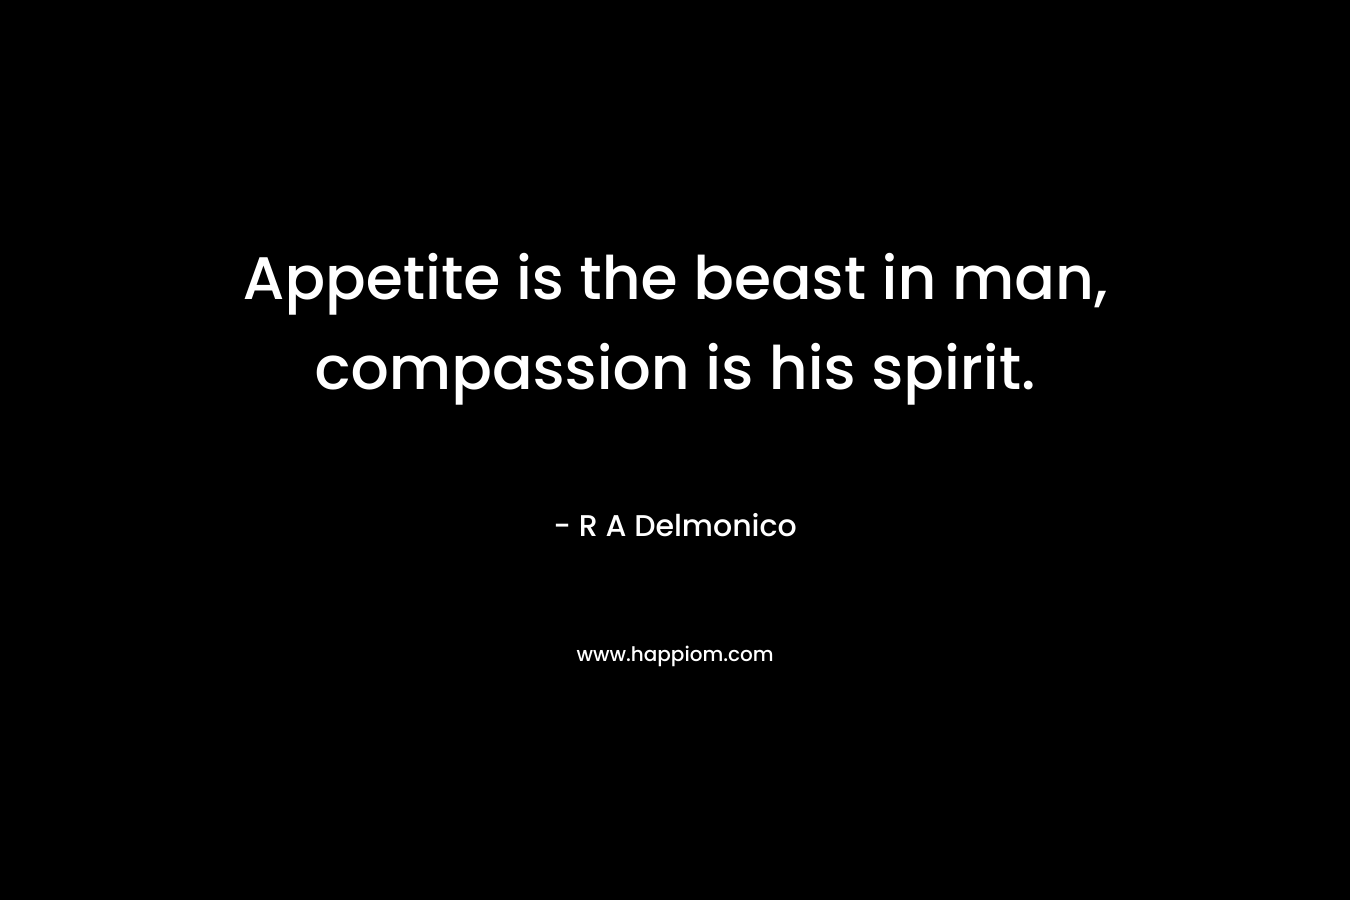 Appetite is the beast in man, compassion is his spirit.